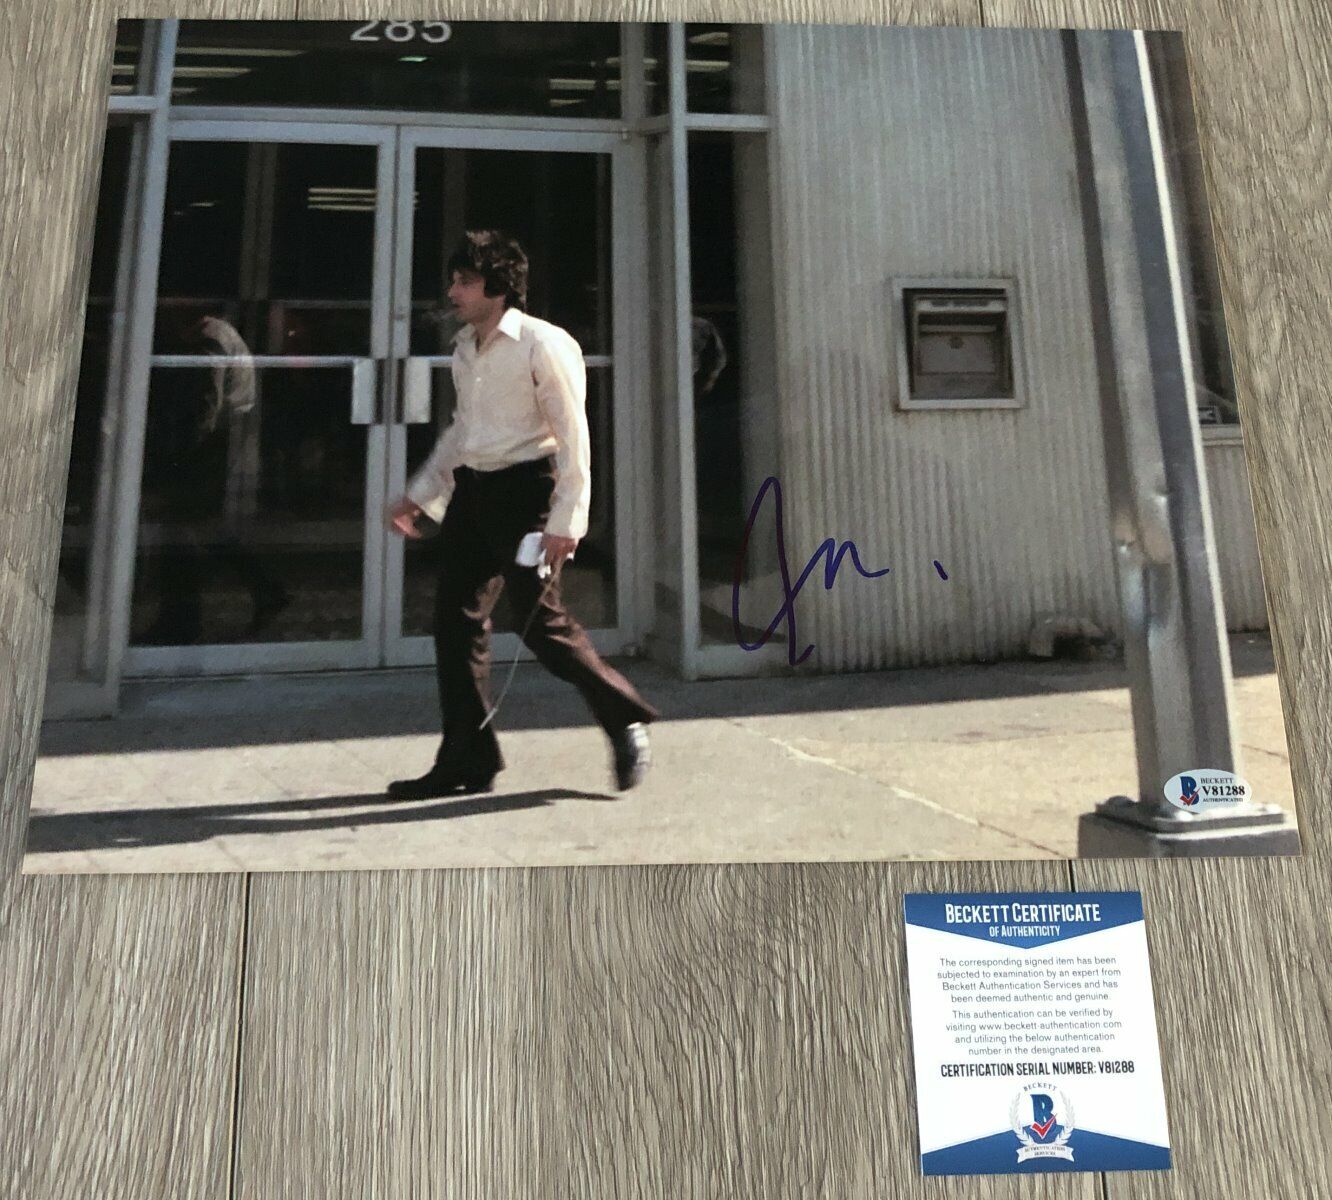 AL PACINO SIGNED DOG DAY AFTERNOON HEAT 11x14 Photo Poster painting w/PROOF & BECKETT BAS COA